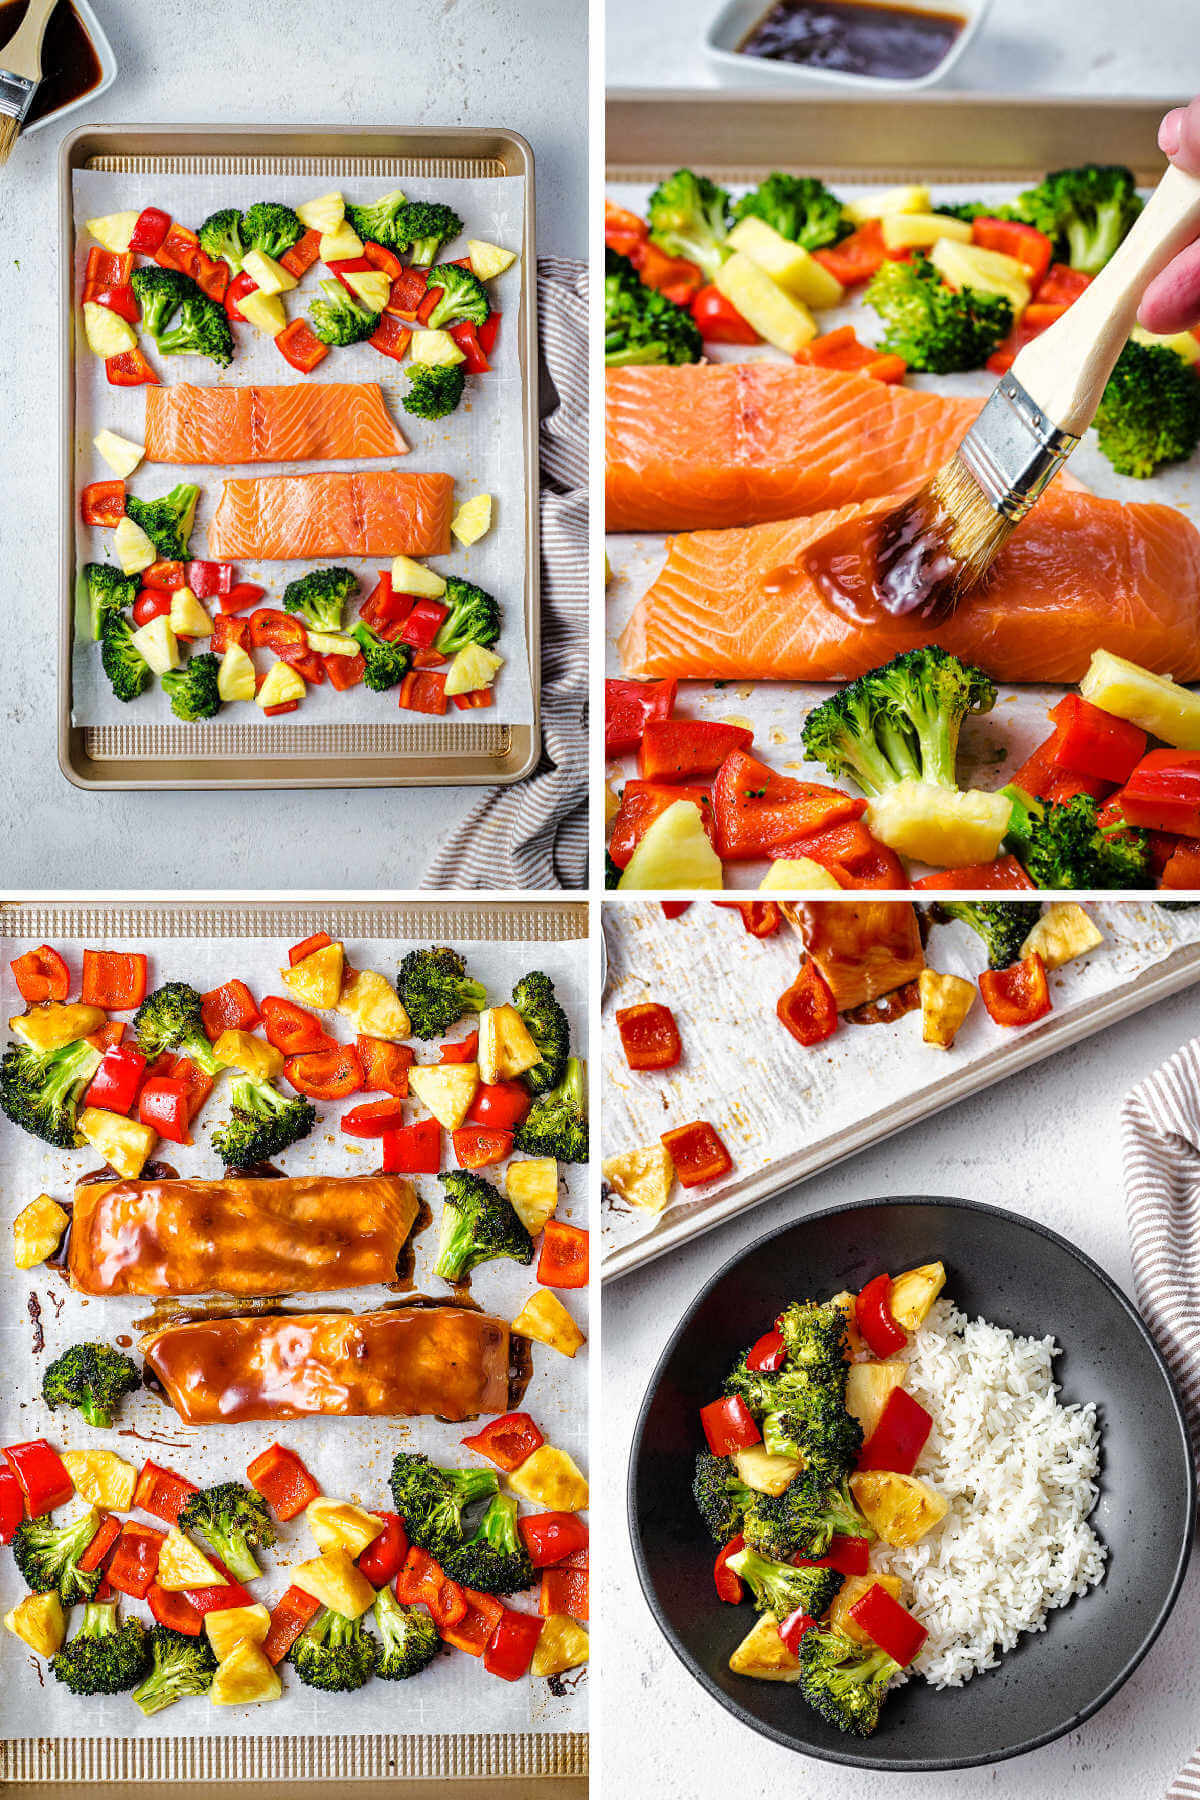 salmon fillets on a baking sheet with vegetables; basting teriyaki sauce on salmon for baking.